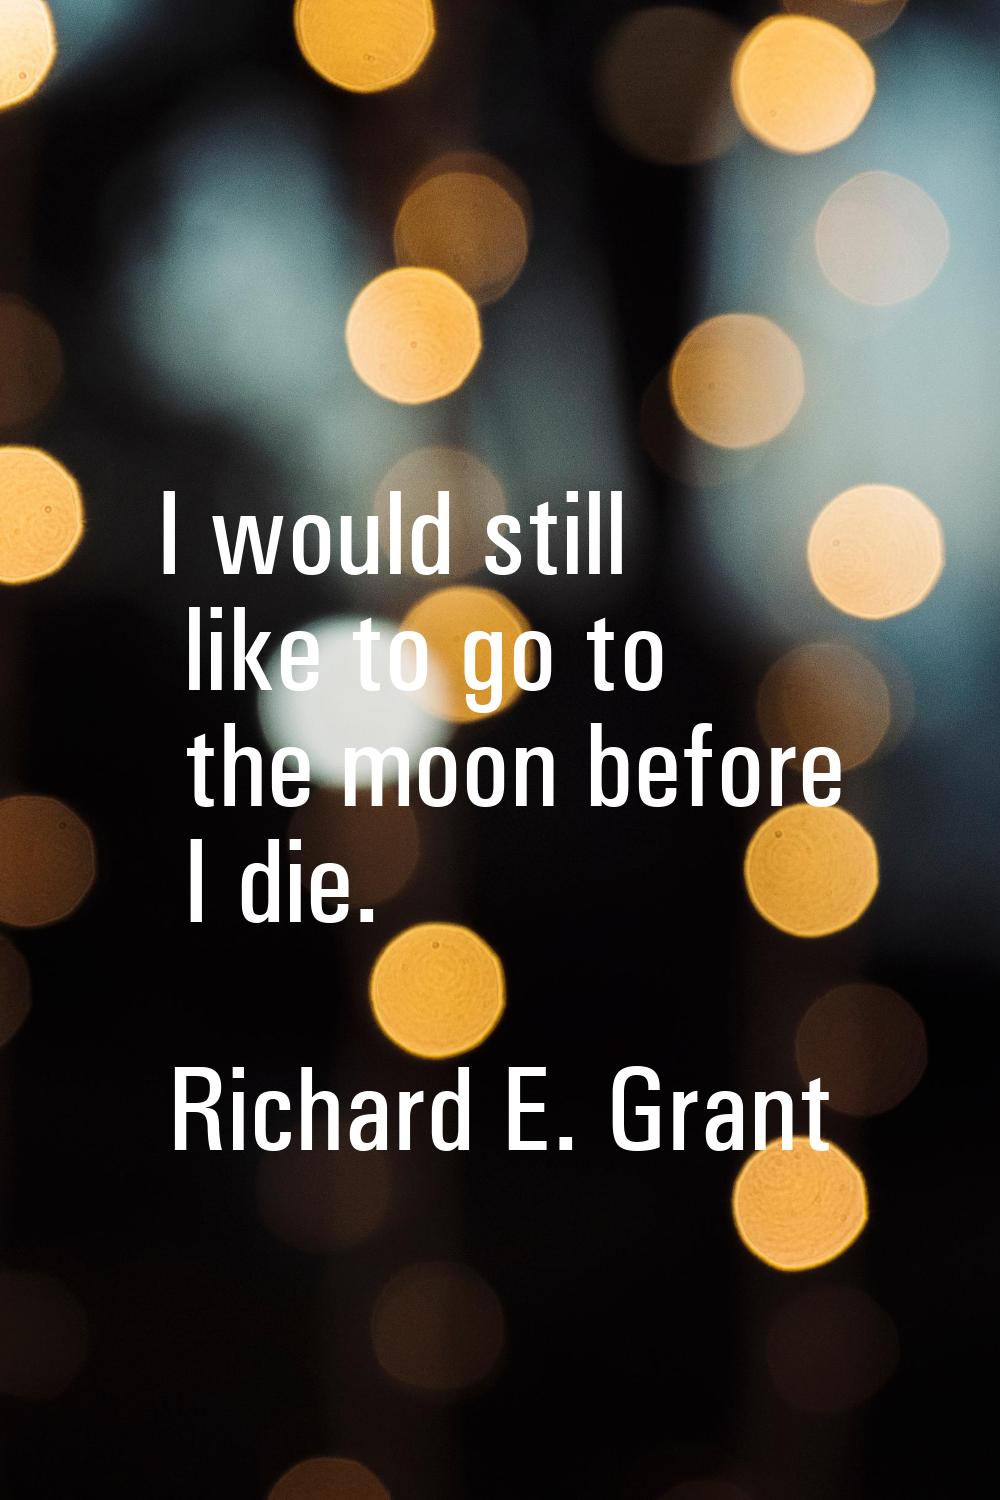 I would still like to go to the moon before I die.